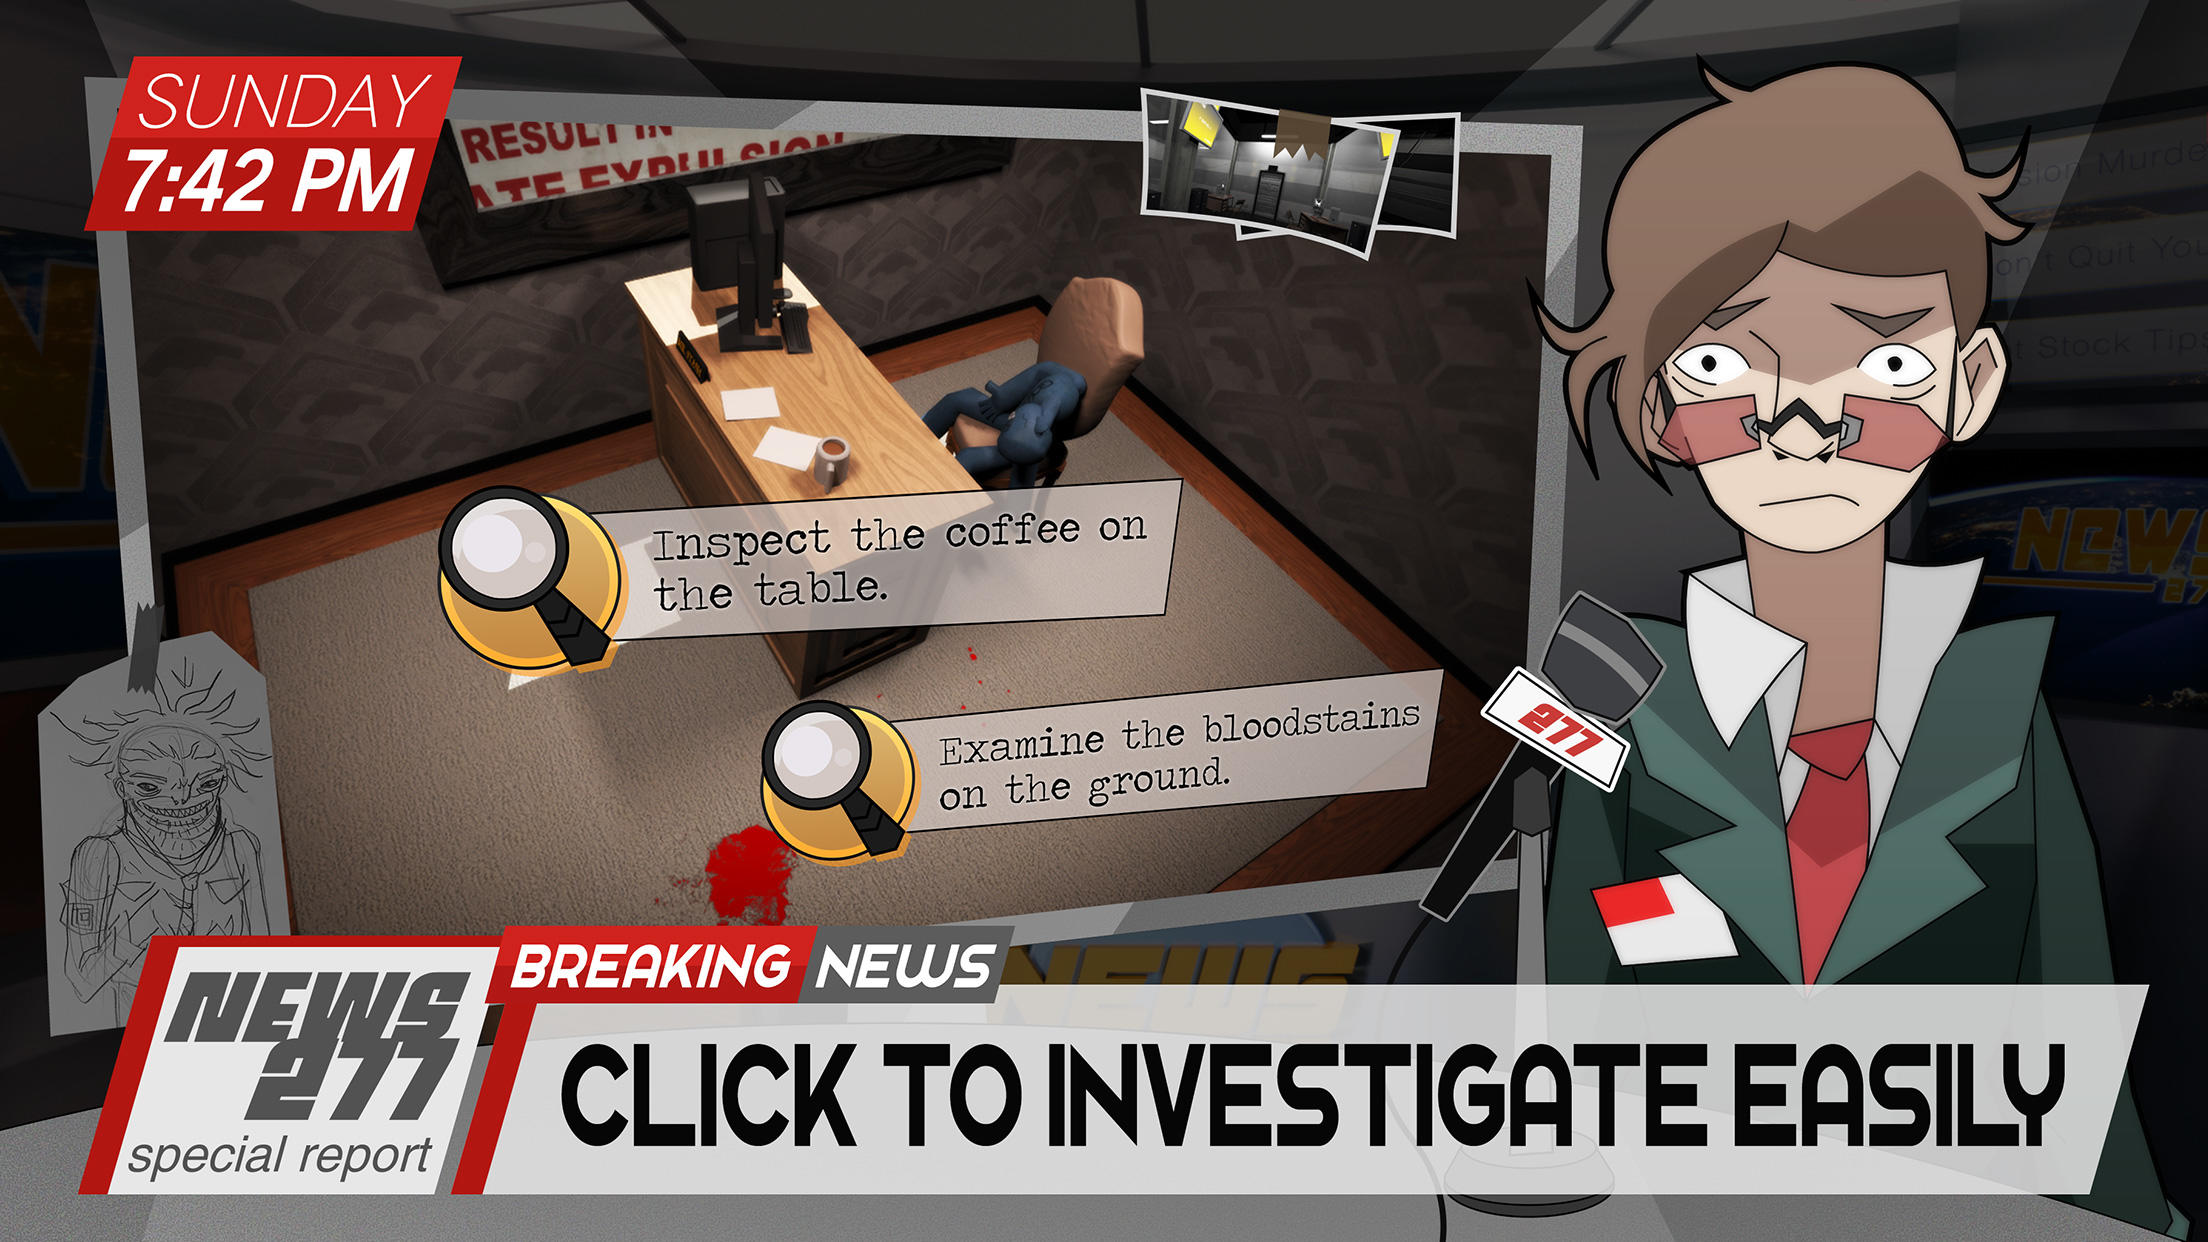 Methods: Detective Competition screenshot game